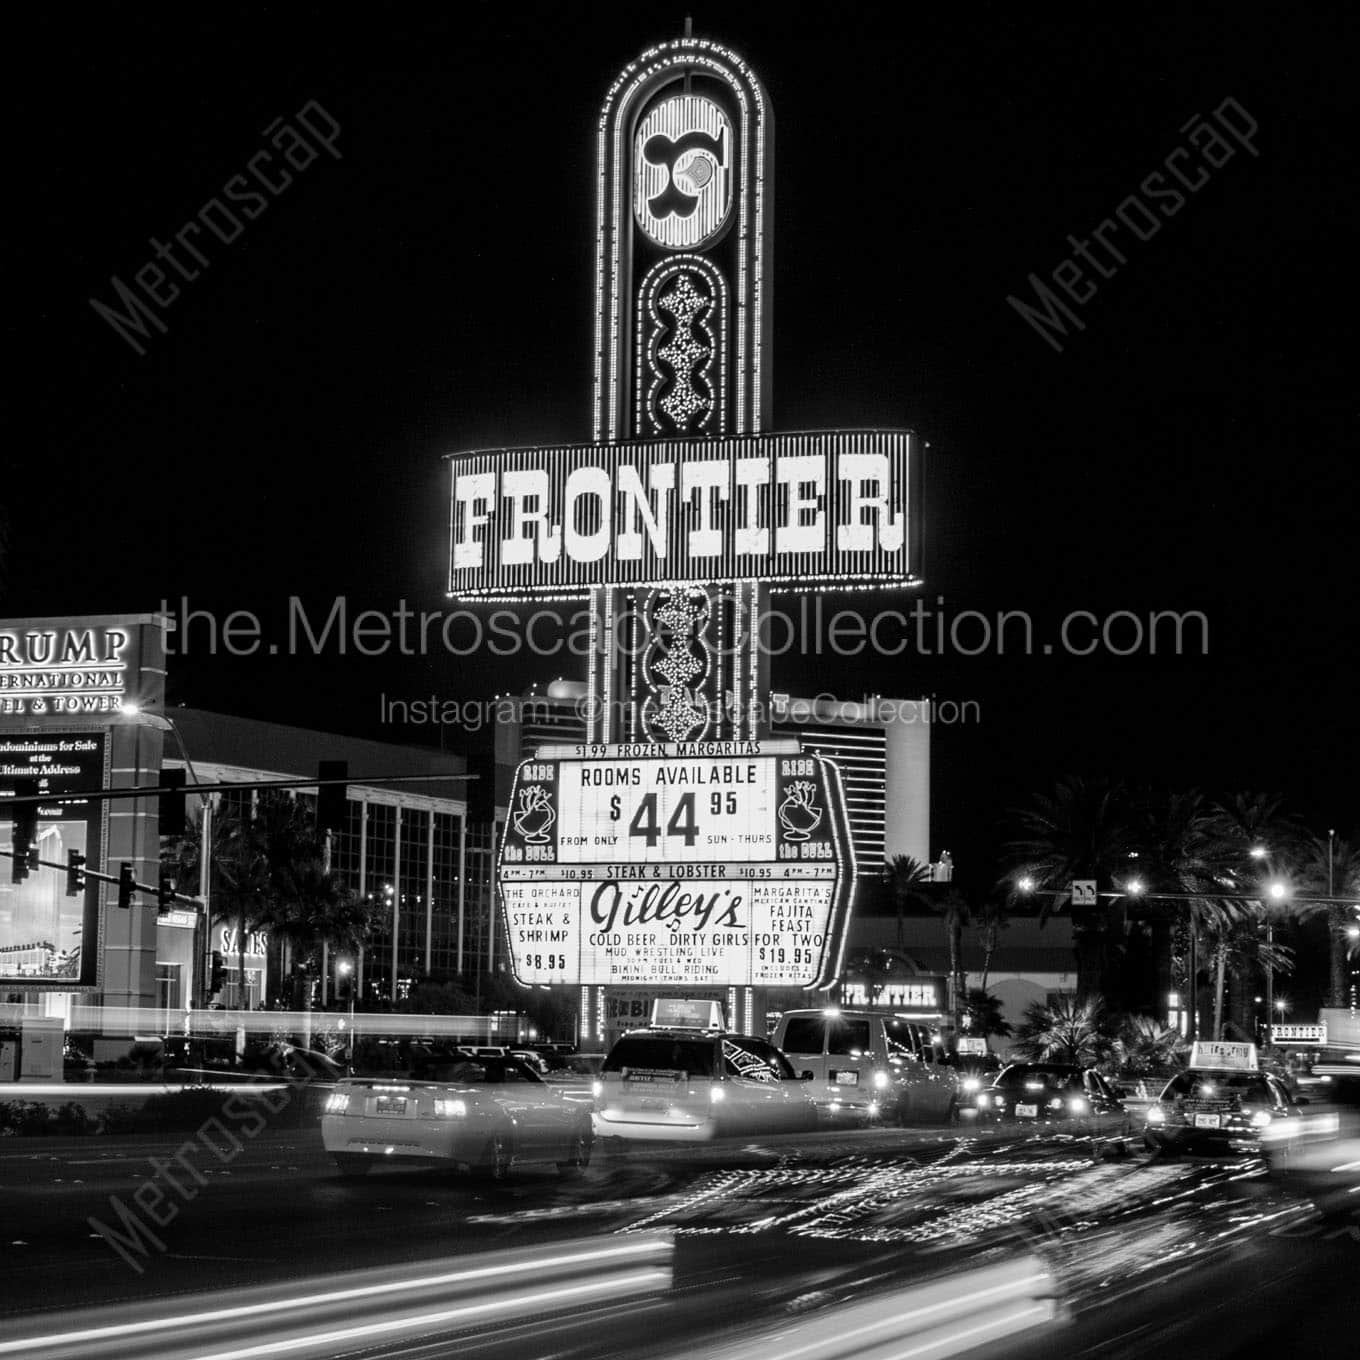 frontier casino sign at night Black & White Wall Art